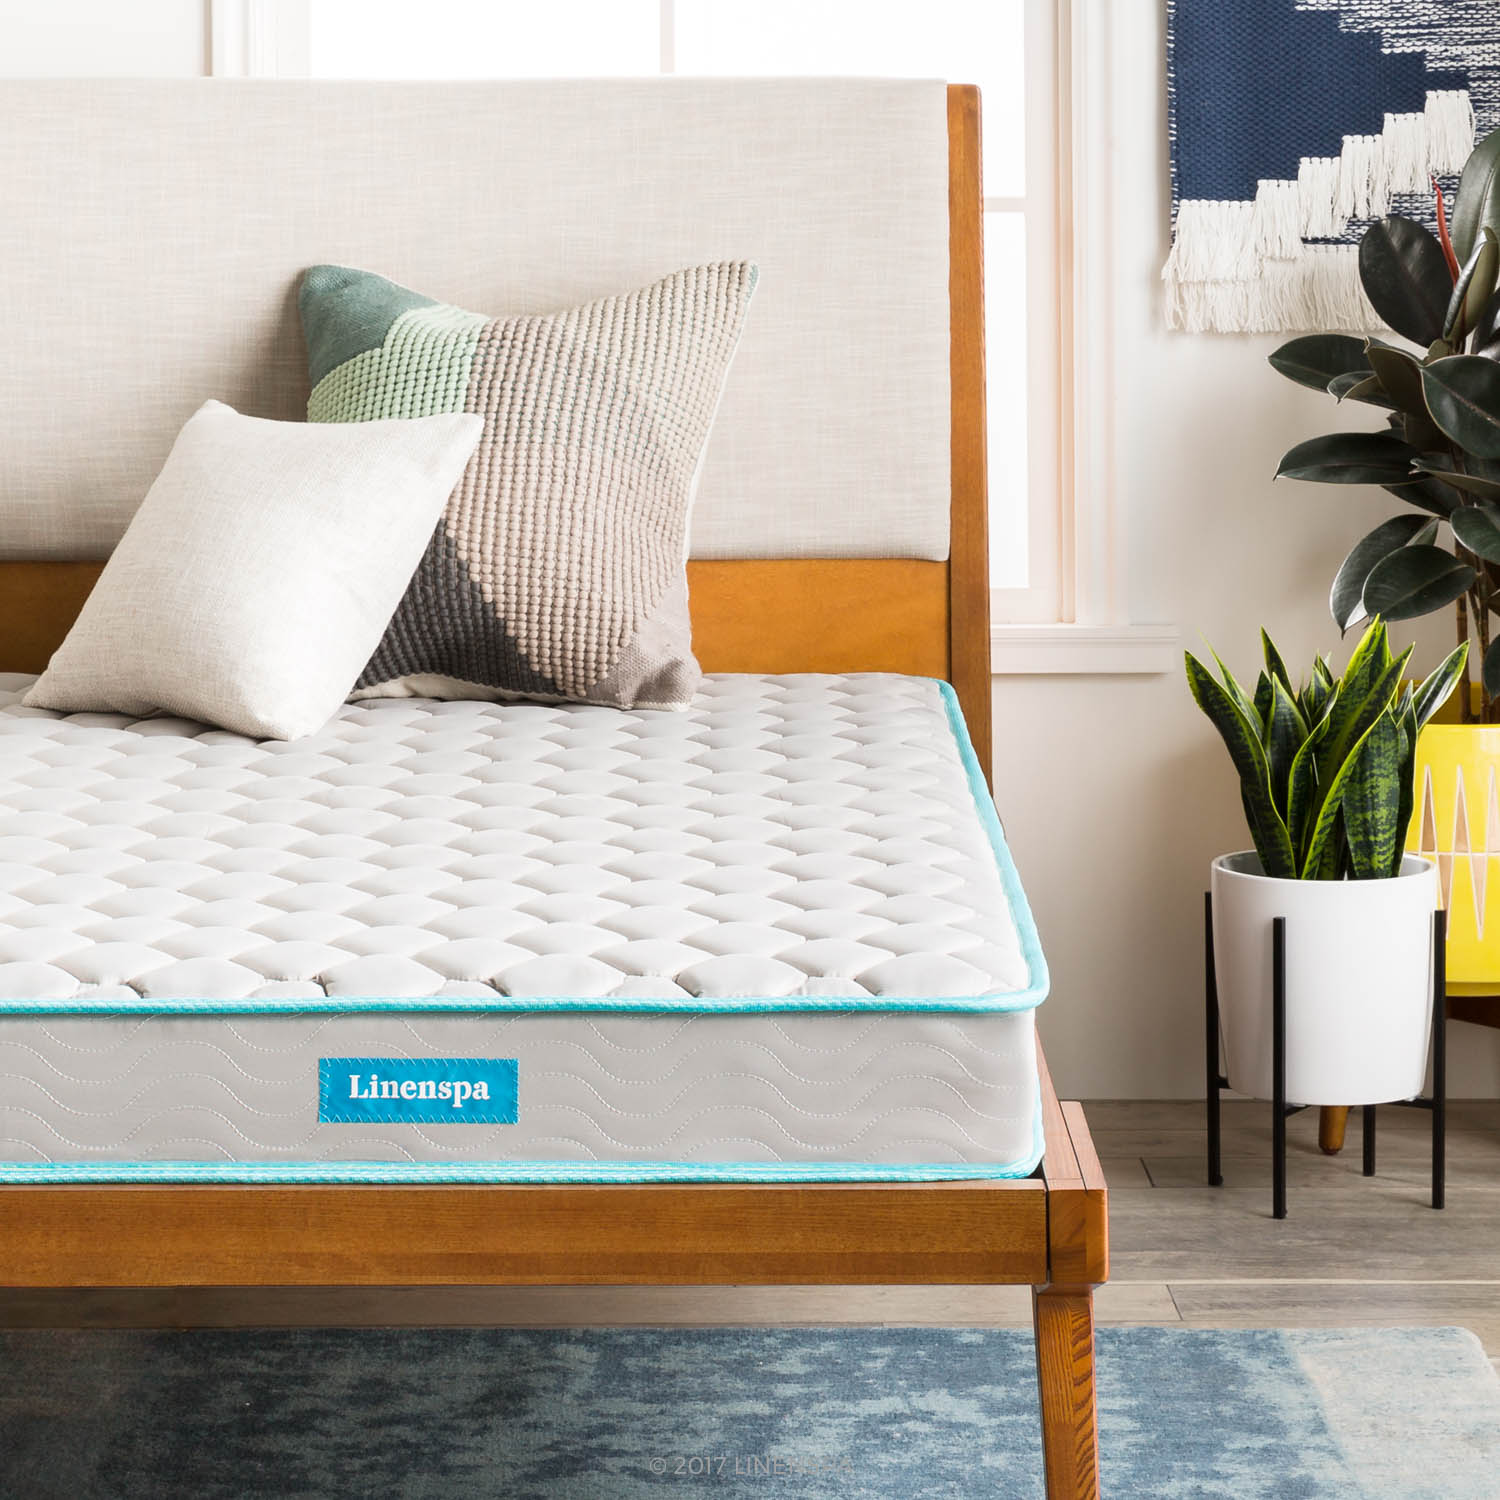 Linenspa 6″ Innerspring mattress-in-a-box from $66